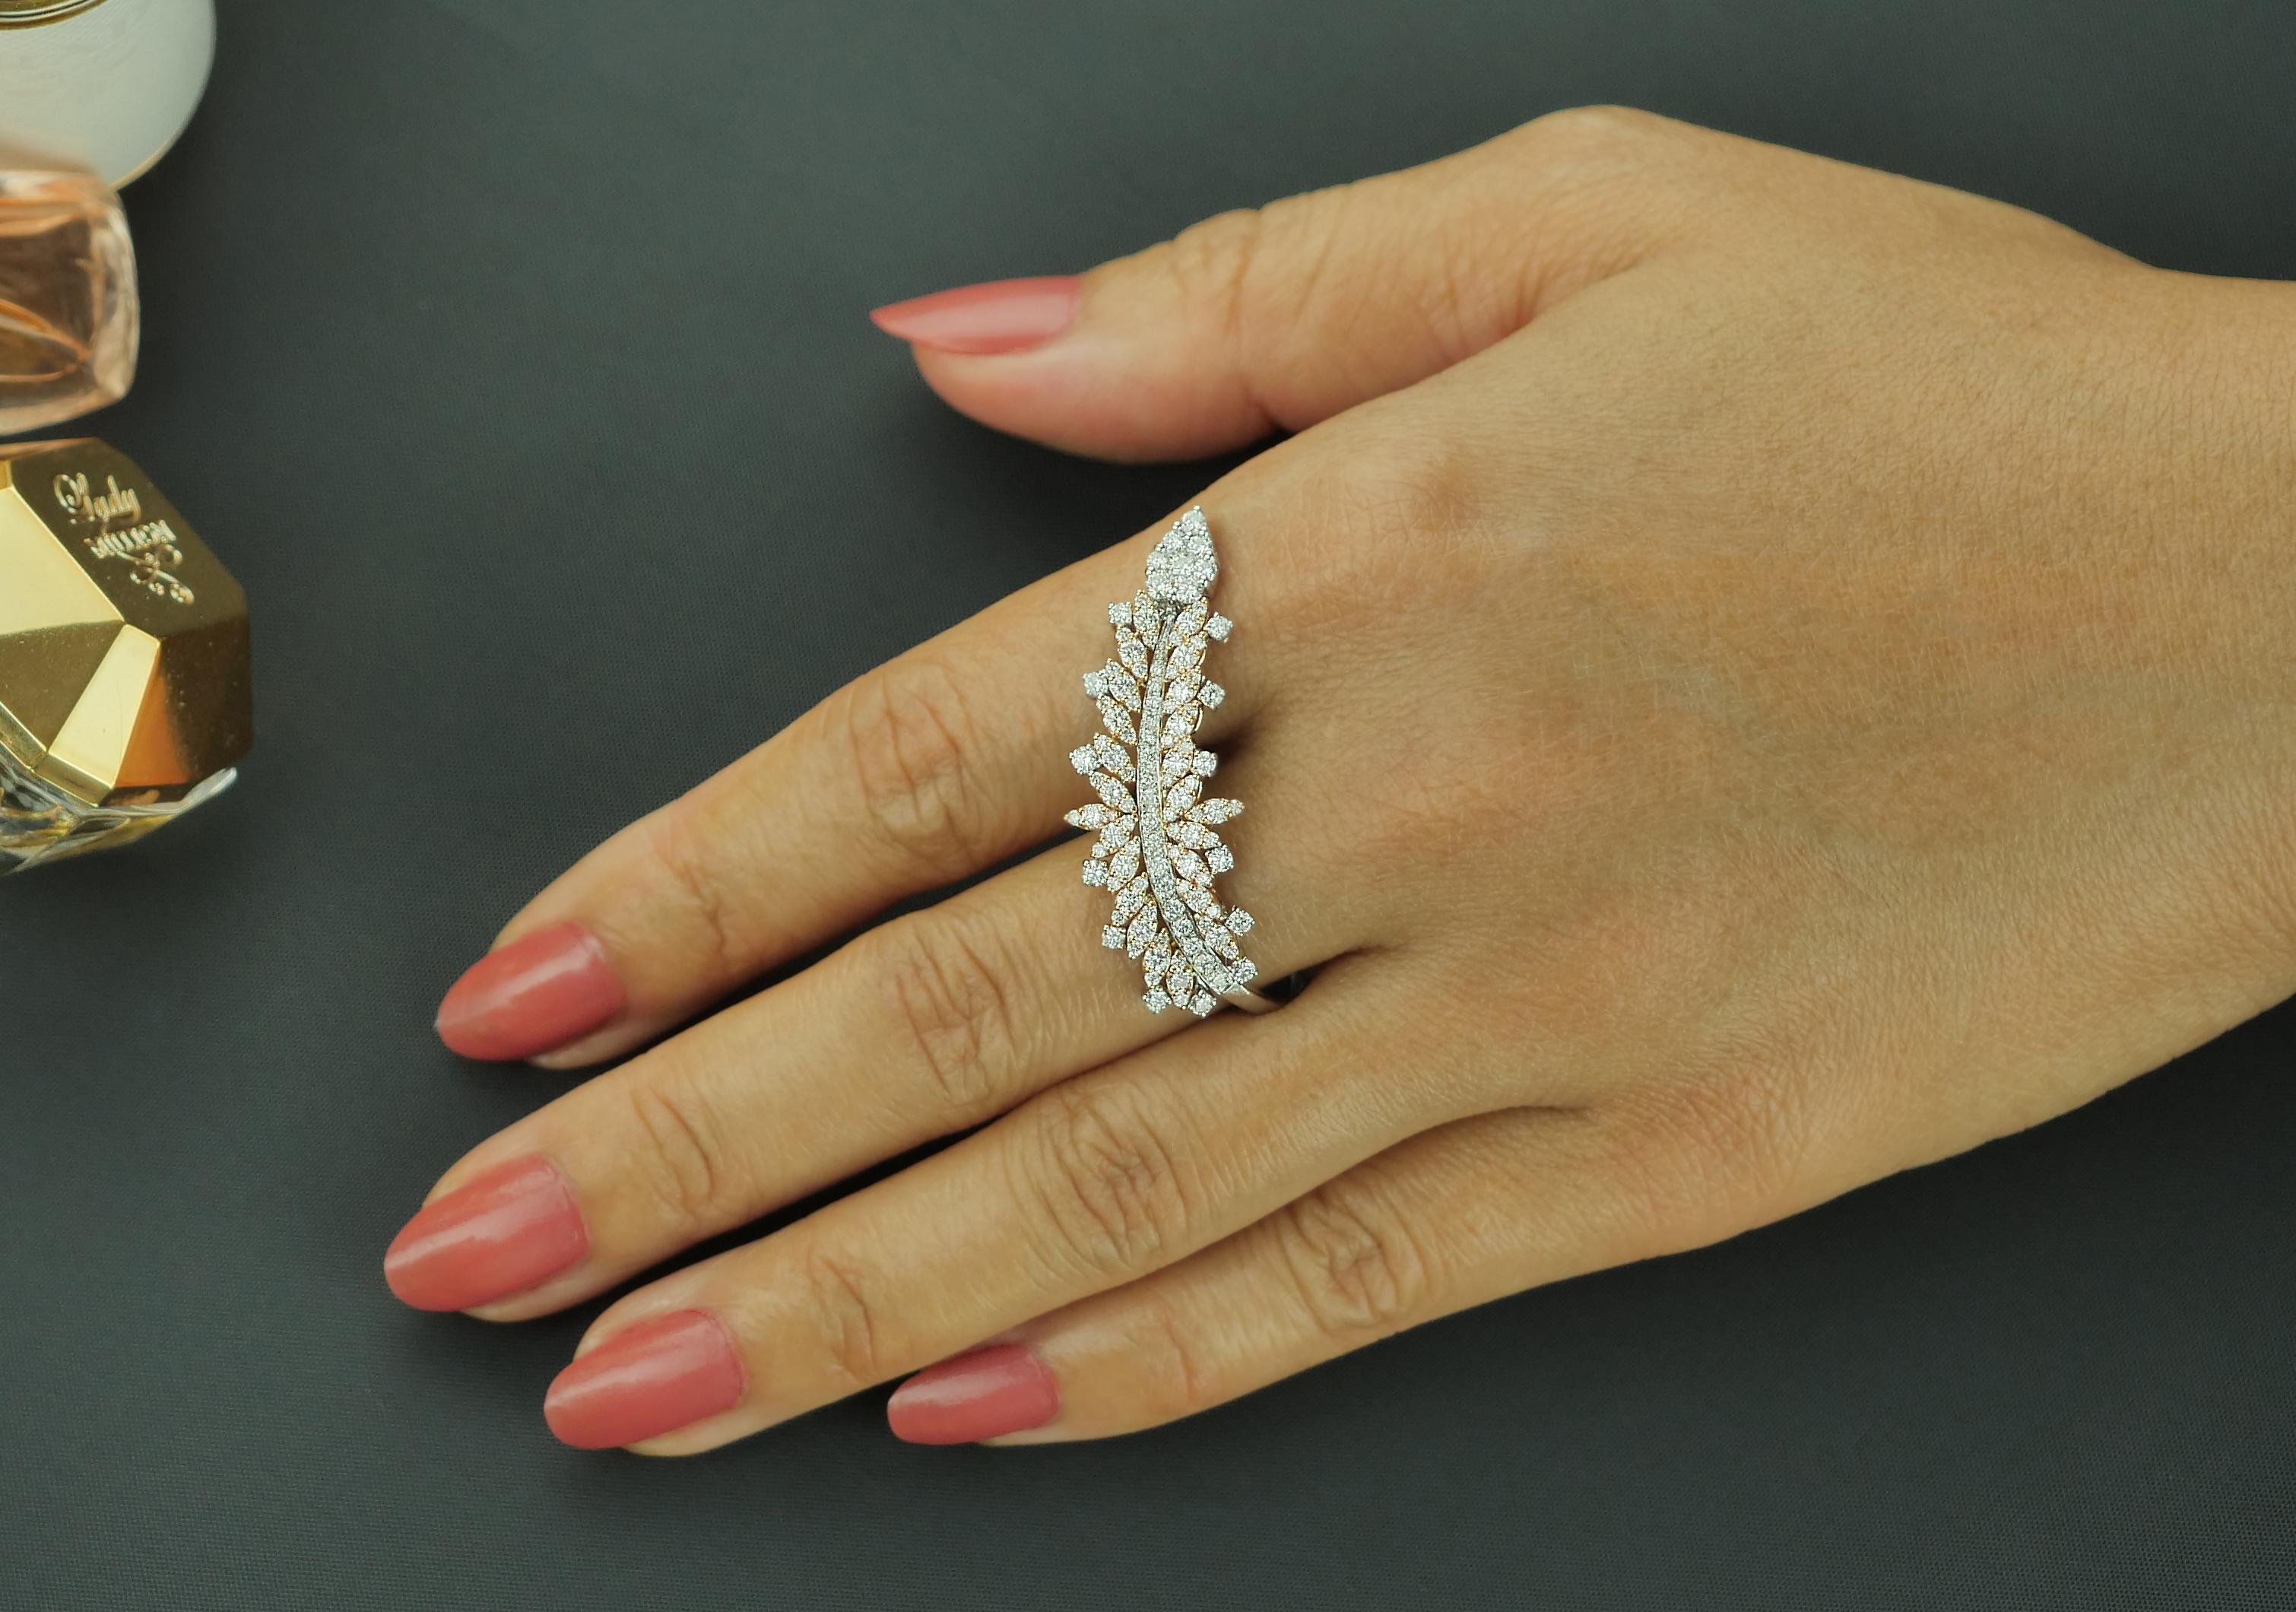 Intricate, modern statement diamond ring by Yessayan. Set in 18ct white and rose gold.
White diamonds, assessed colour G/H, assessed clarity VS
Natural Fancy Pink Diamonds, assessed colour Fancy Light Pink, assessed clarity VS
Approximate total